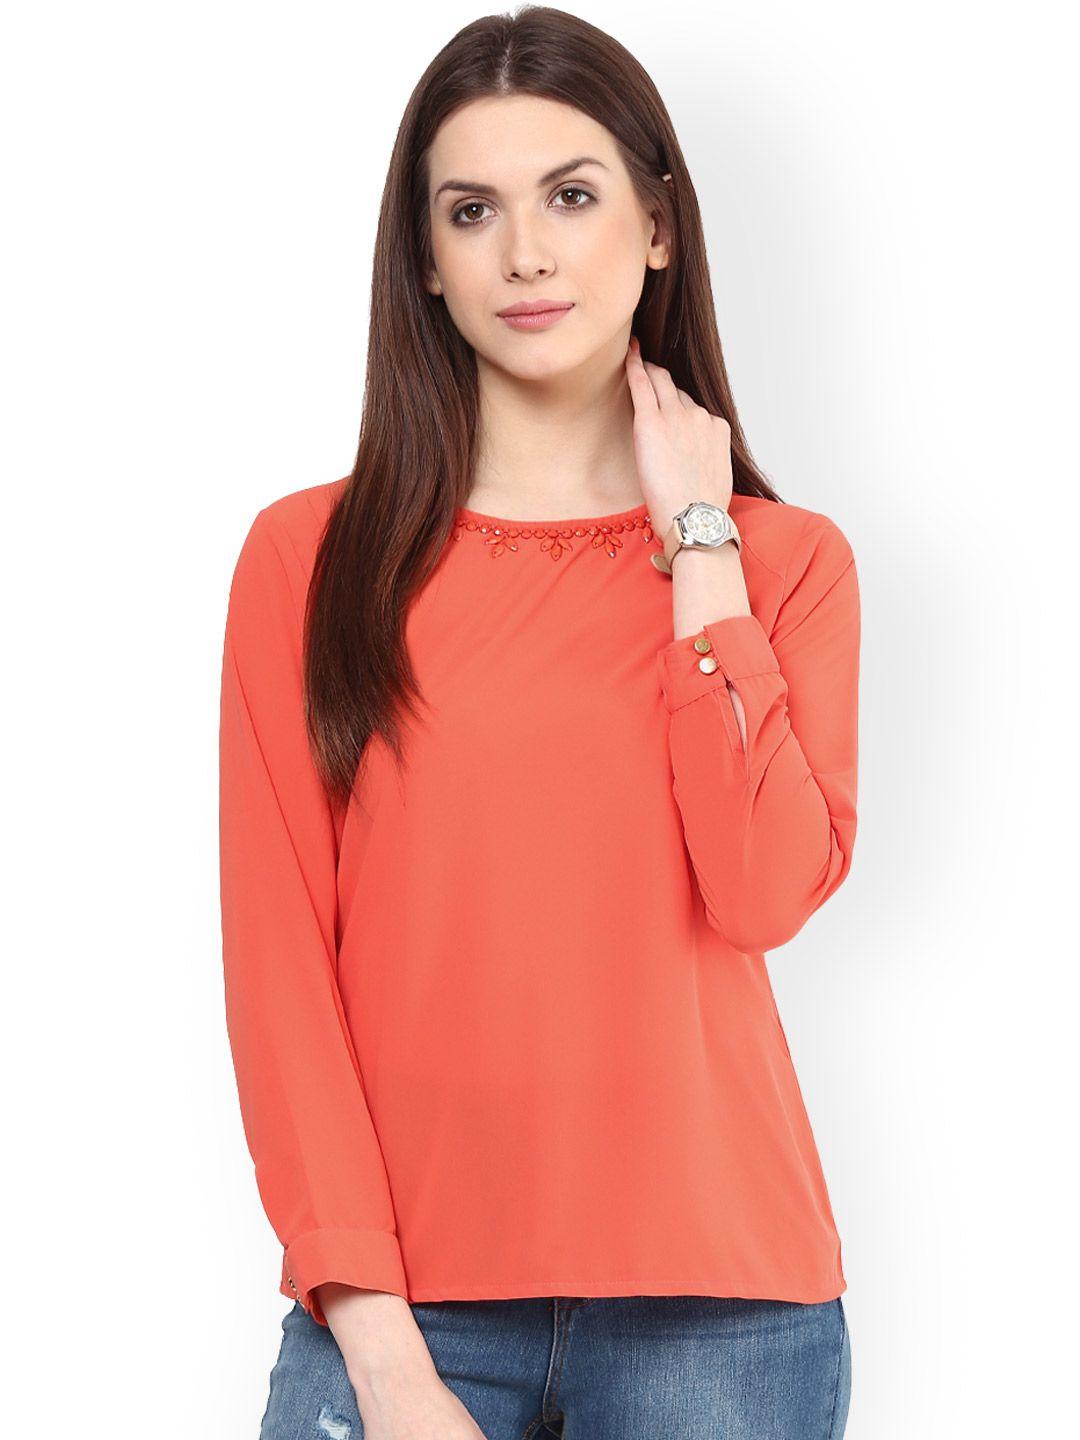 rare-coral-orange-georgette-top-with-embellished-detail